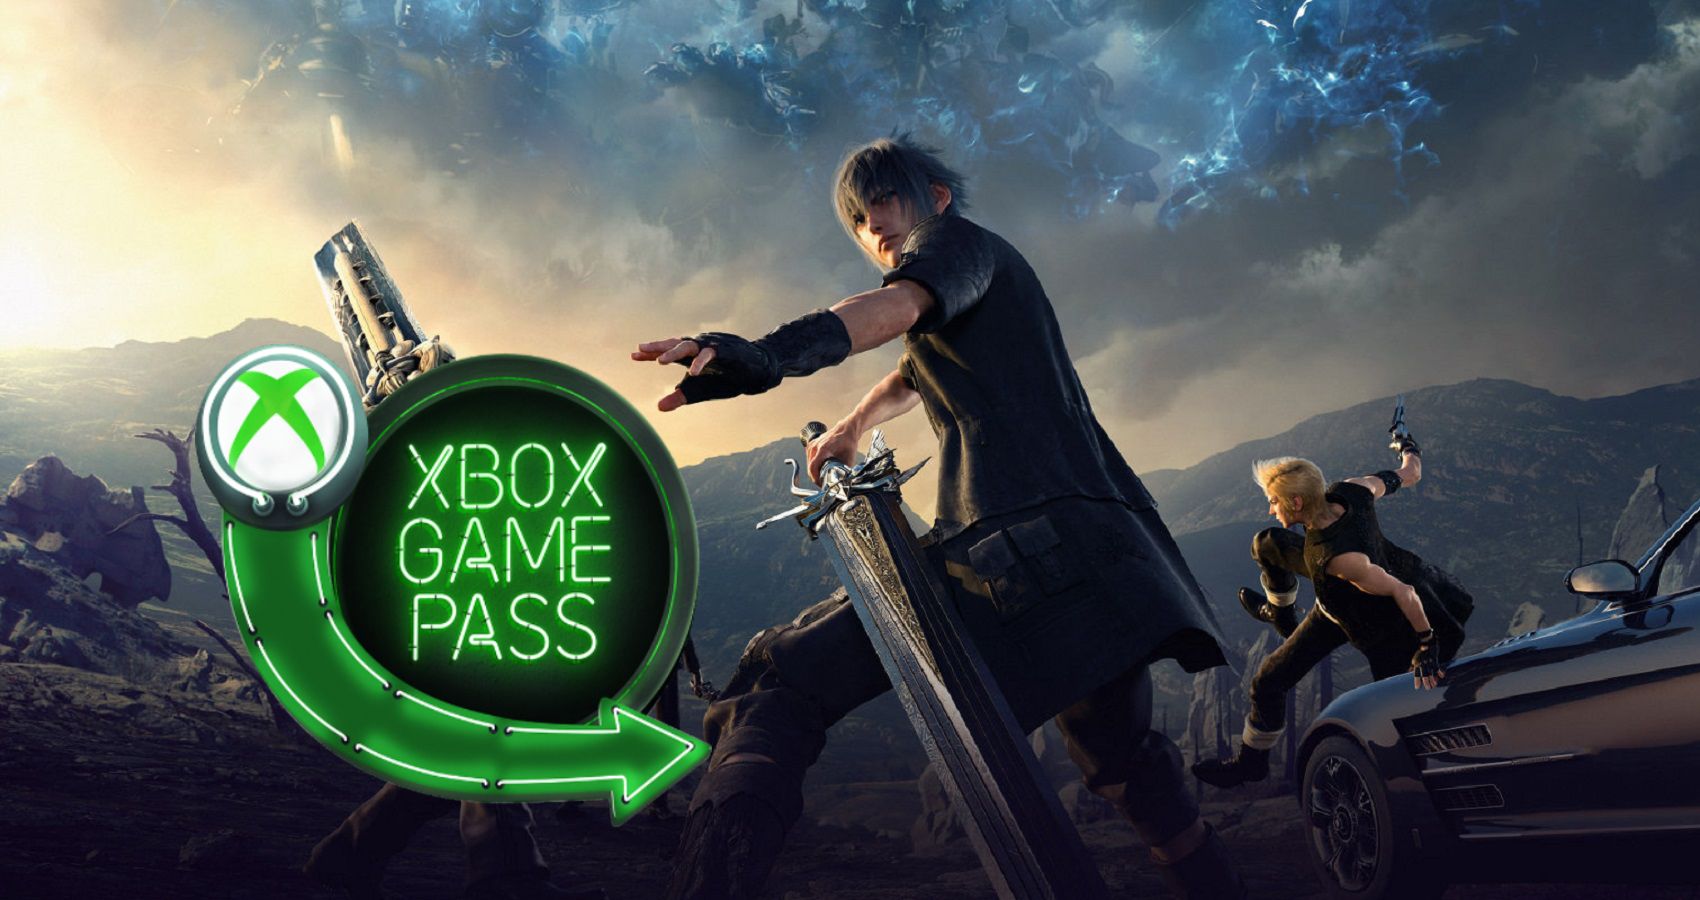 final fantasy xbox game pass release date